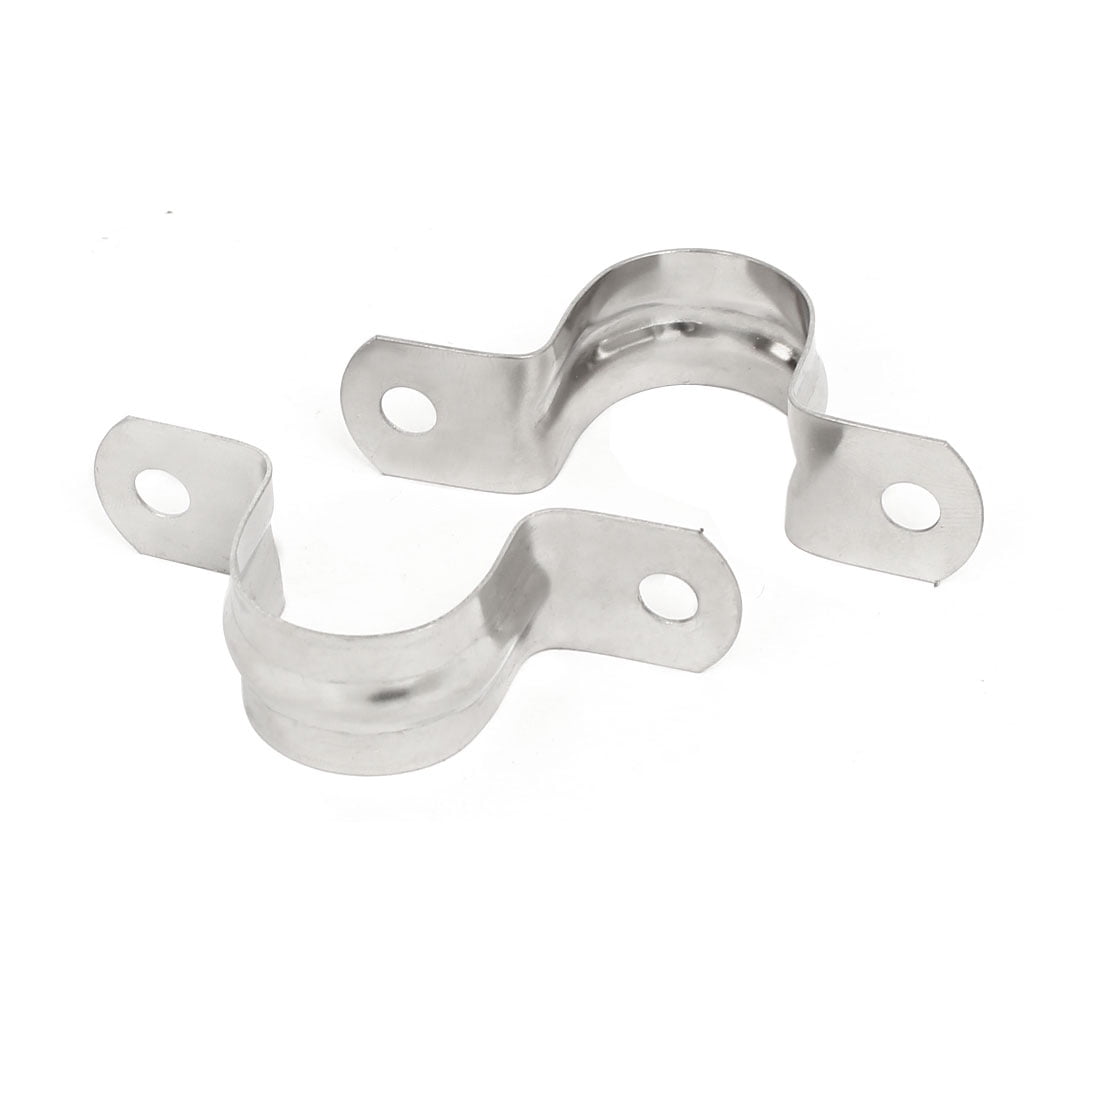 M25 201 Stainless Steel Two Hole Pipe Straps Tension Tube Clip Clamp 3/4" 15pcs 604267764592